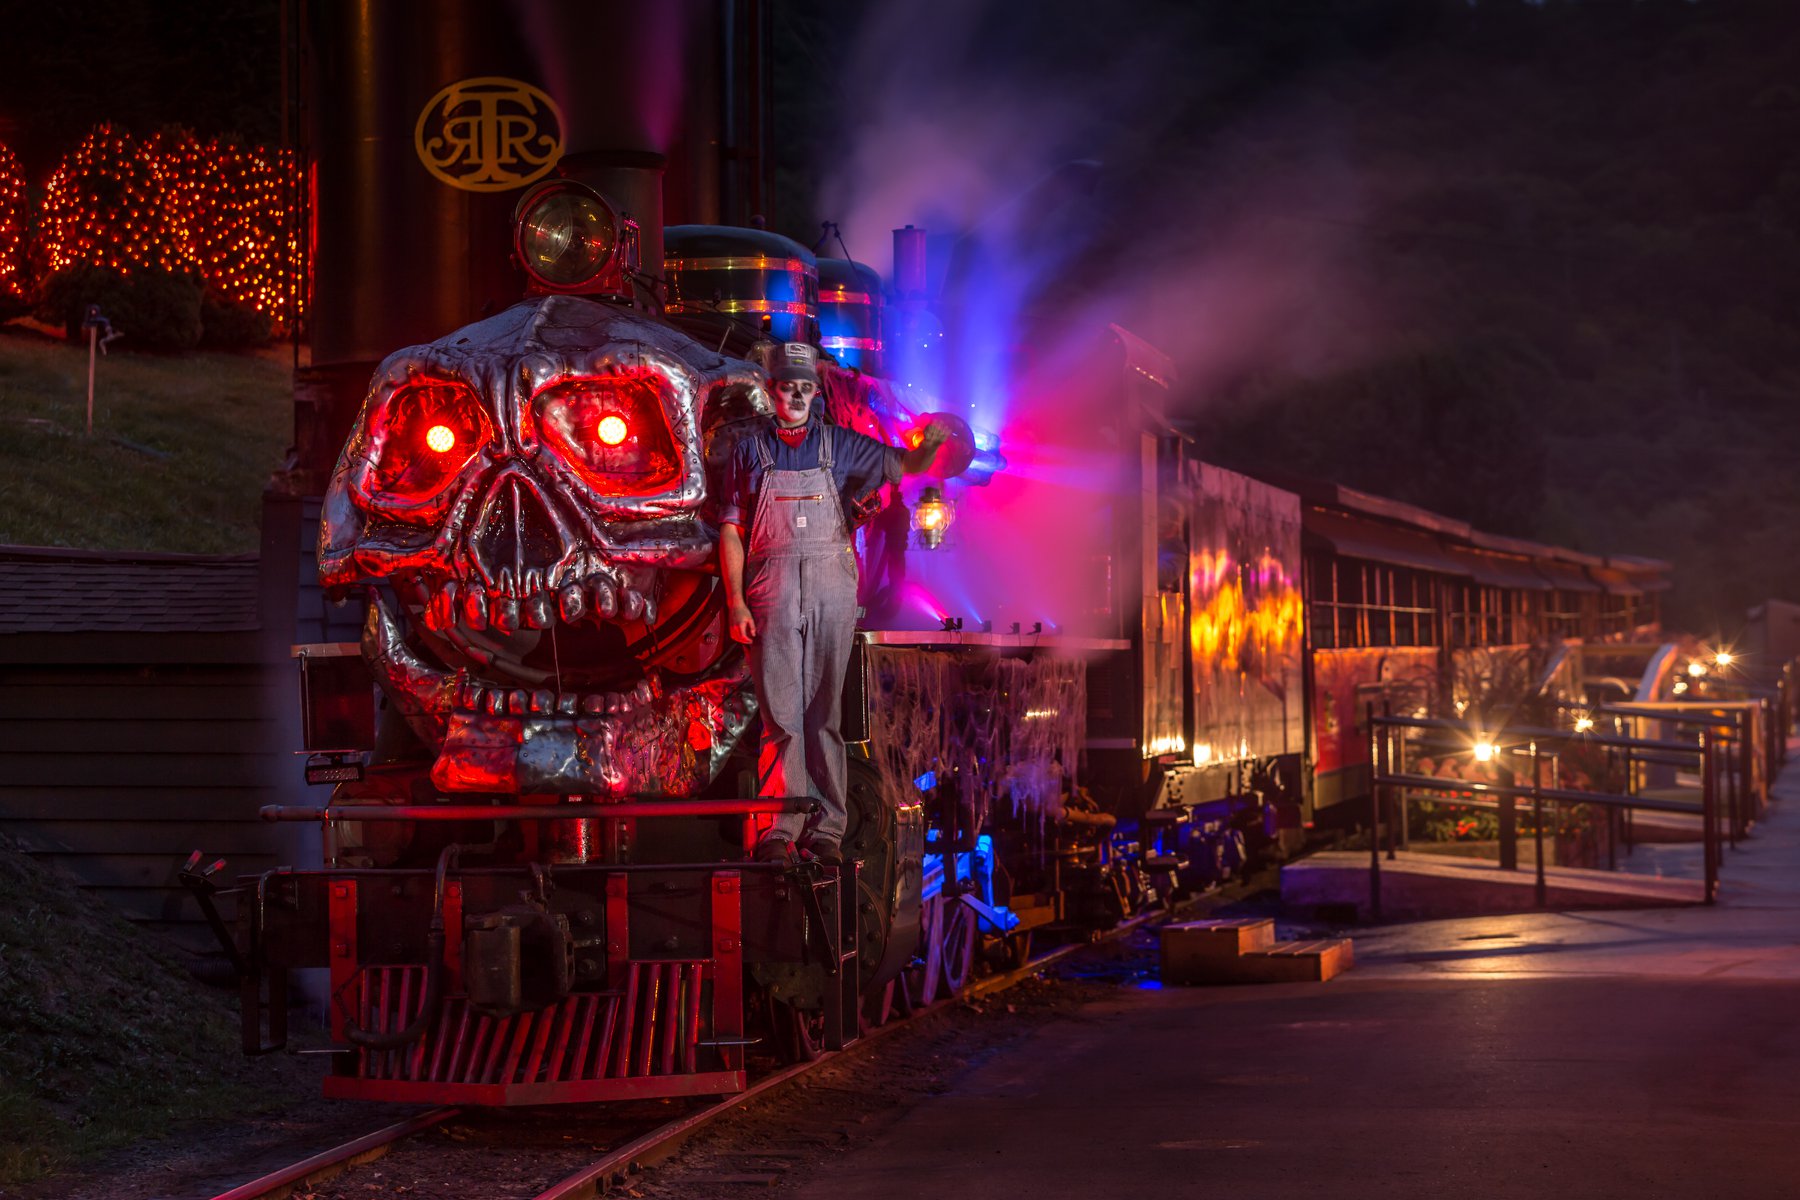 spooky train pictures